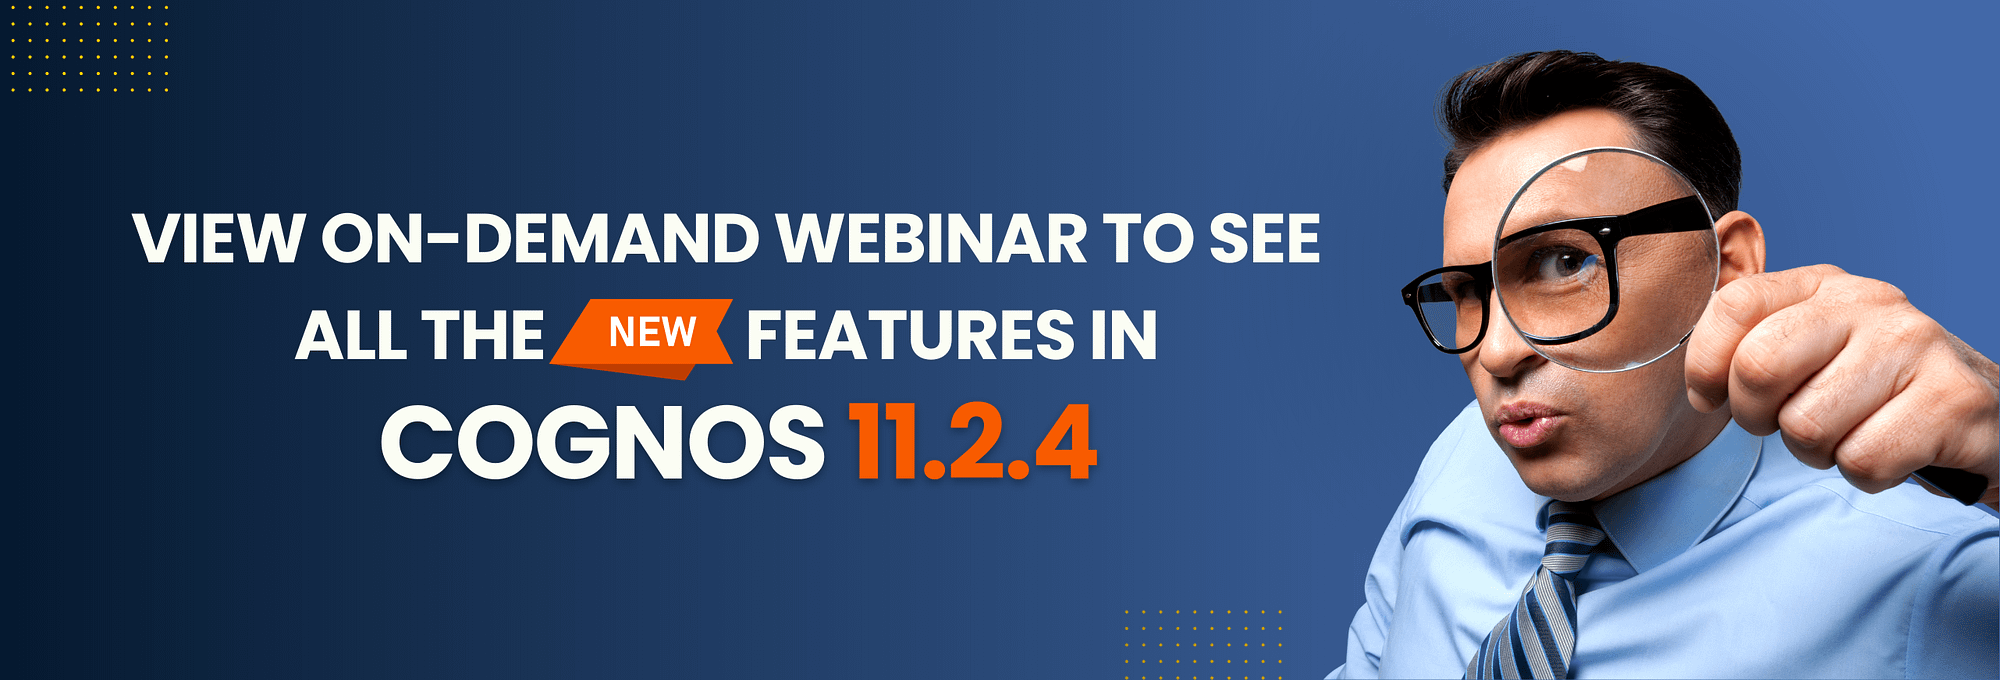 View on-demand webinar to see all the new features in Cognos 11.2.4